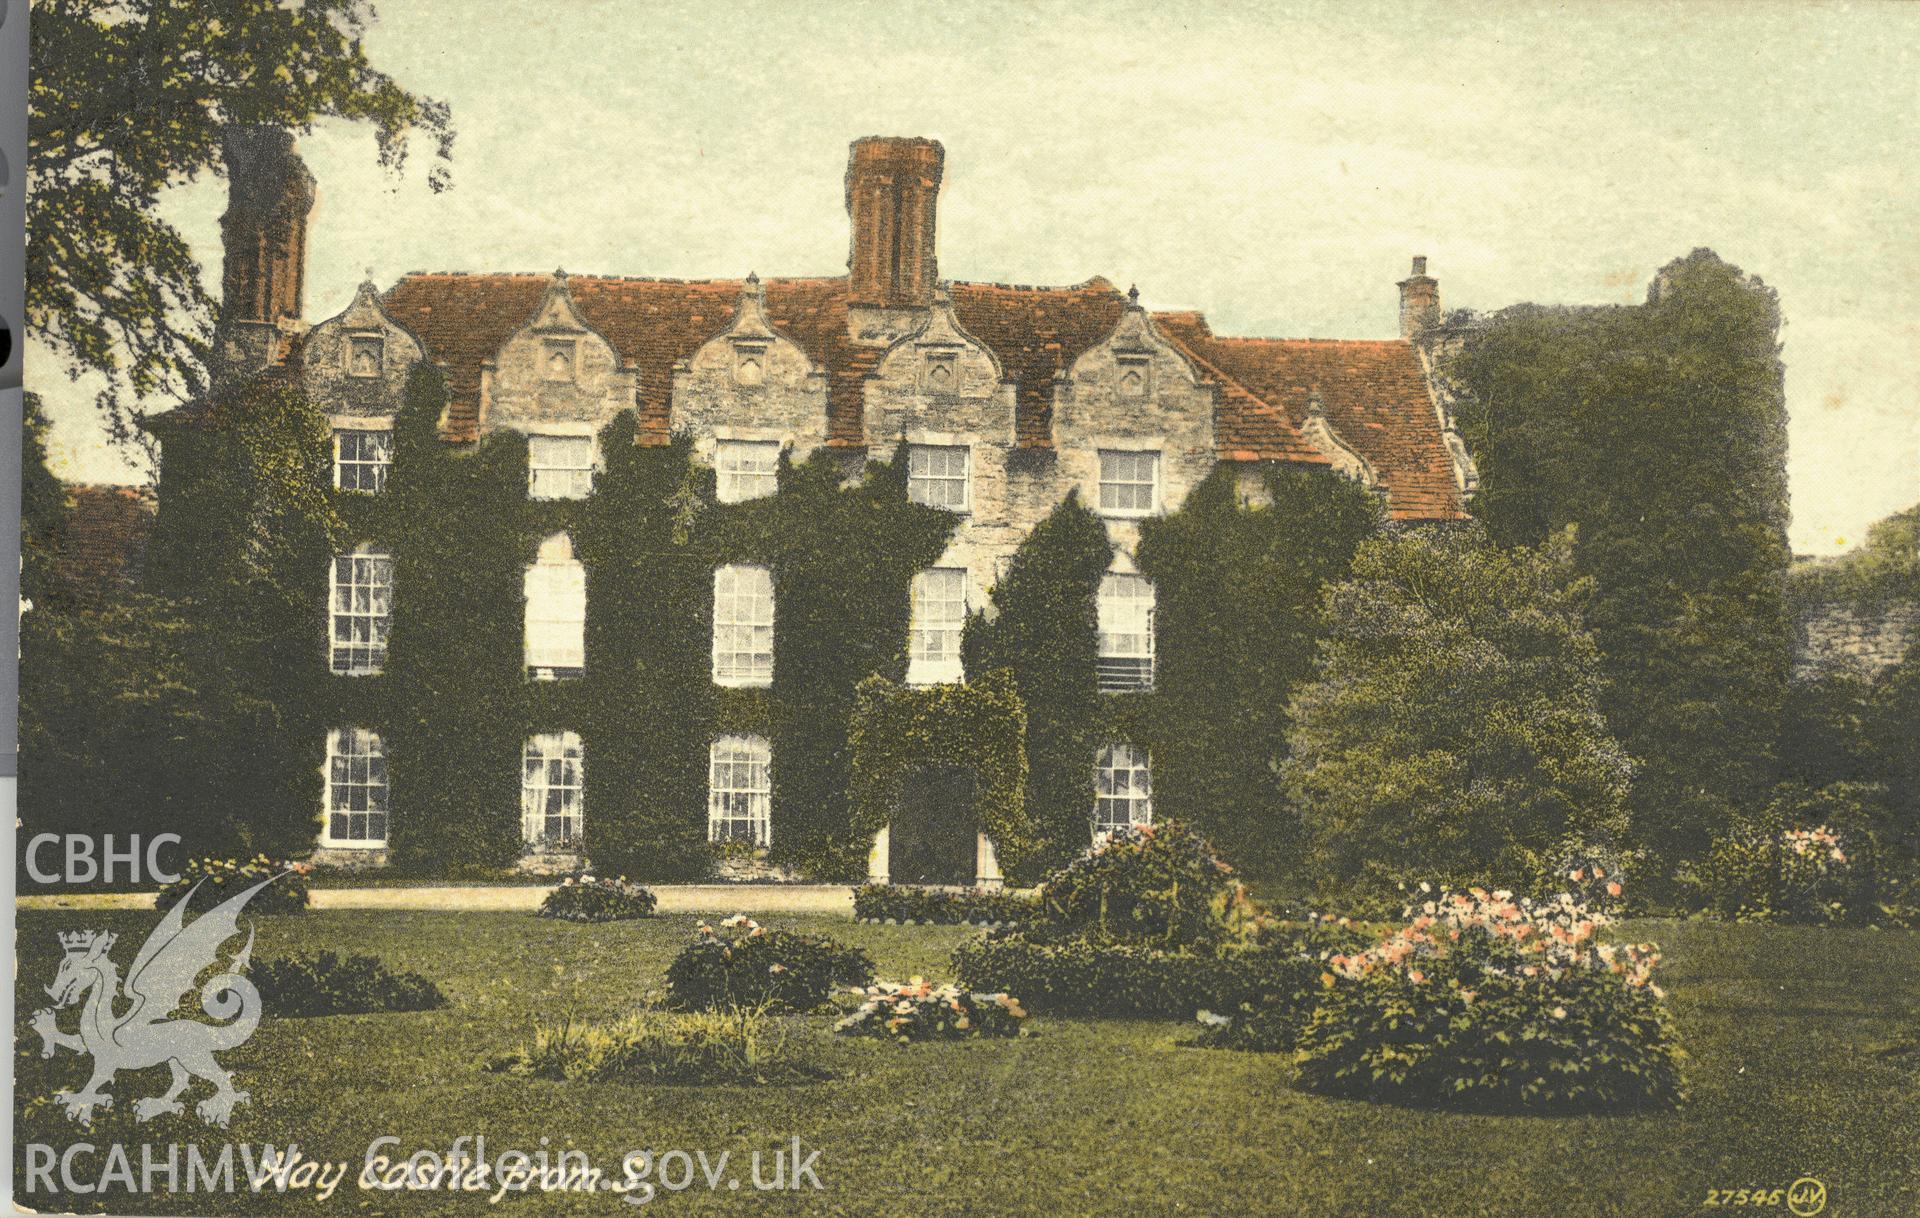 Digitised postcard image of Castle House, Hay, H.R. Grant, Stationer, Hay. Produced by Parks and Gardens Data Services, from an original item in the Peter Davis Collection at Parks and Gardens UK. We hold only web-resolution images of this collection, suitable for viewing on screen and for research purposes only. We do not hold the original images, or publication quality scans.